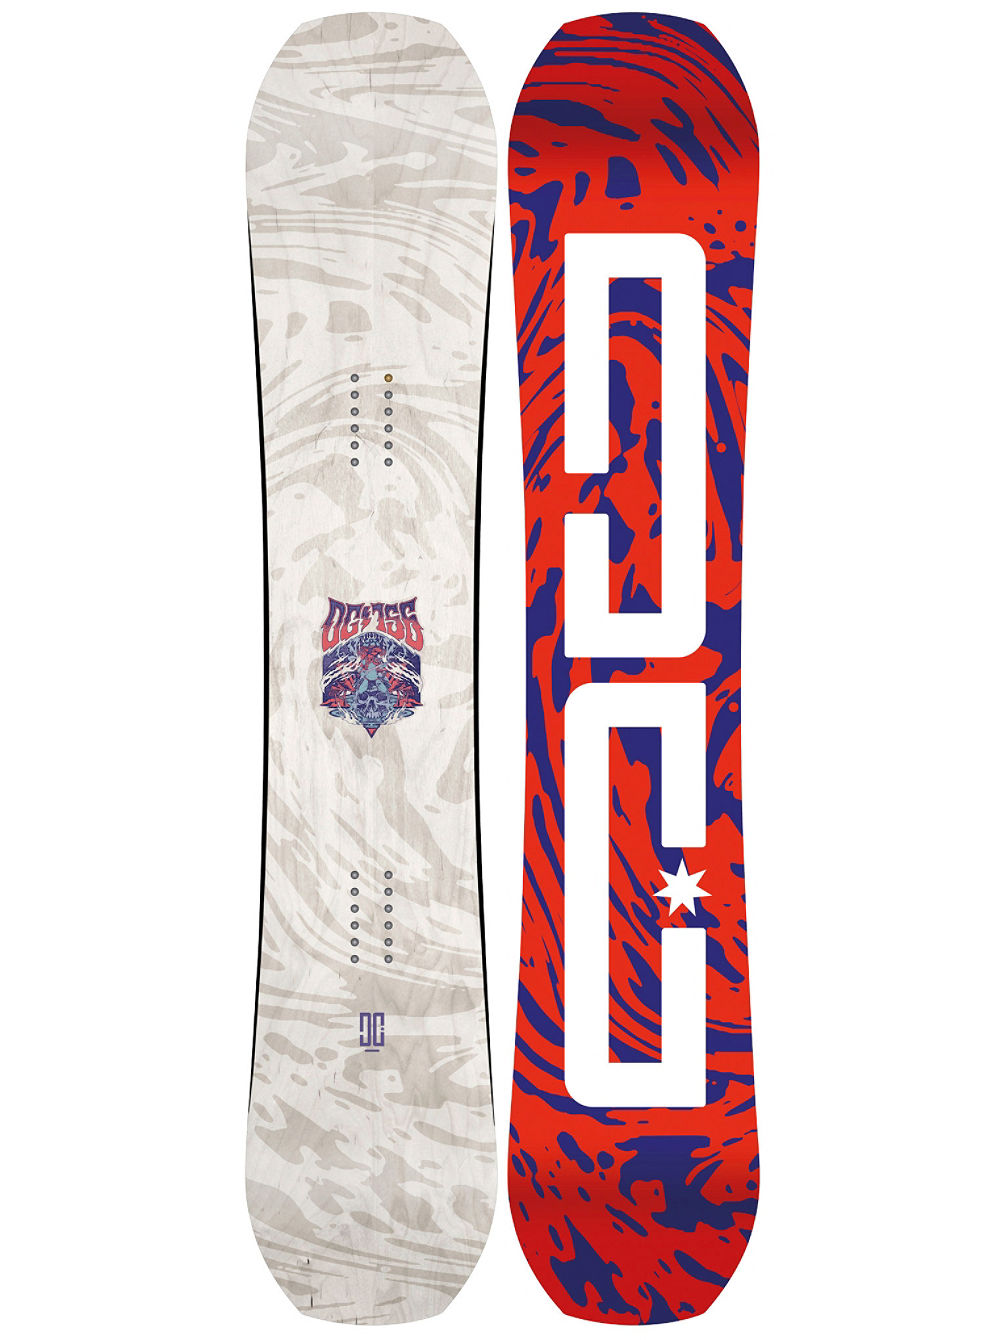 The 156 2019 Snowboard